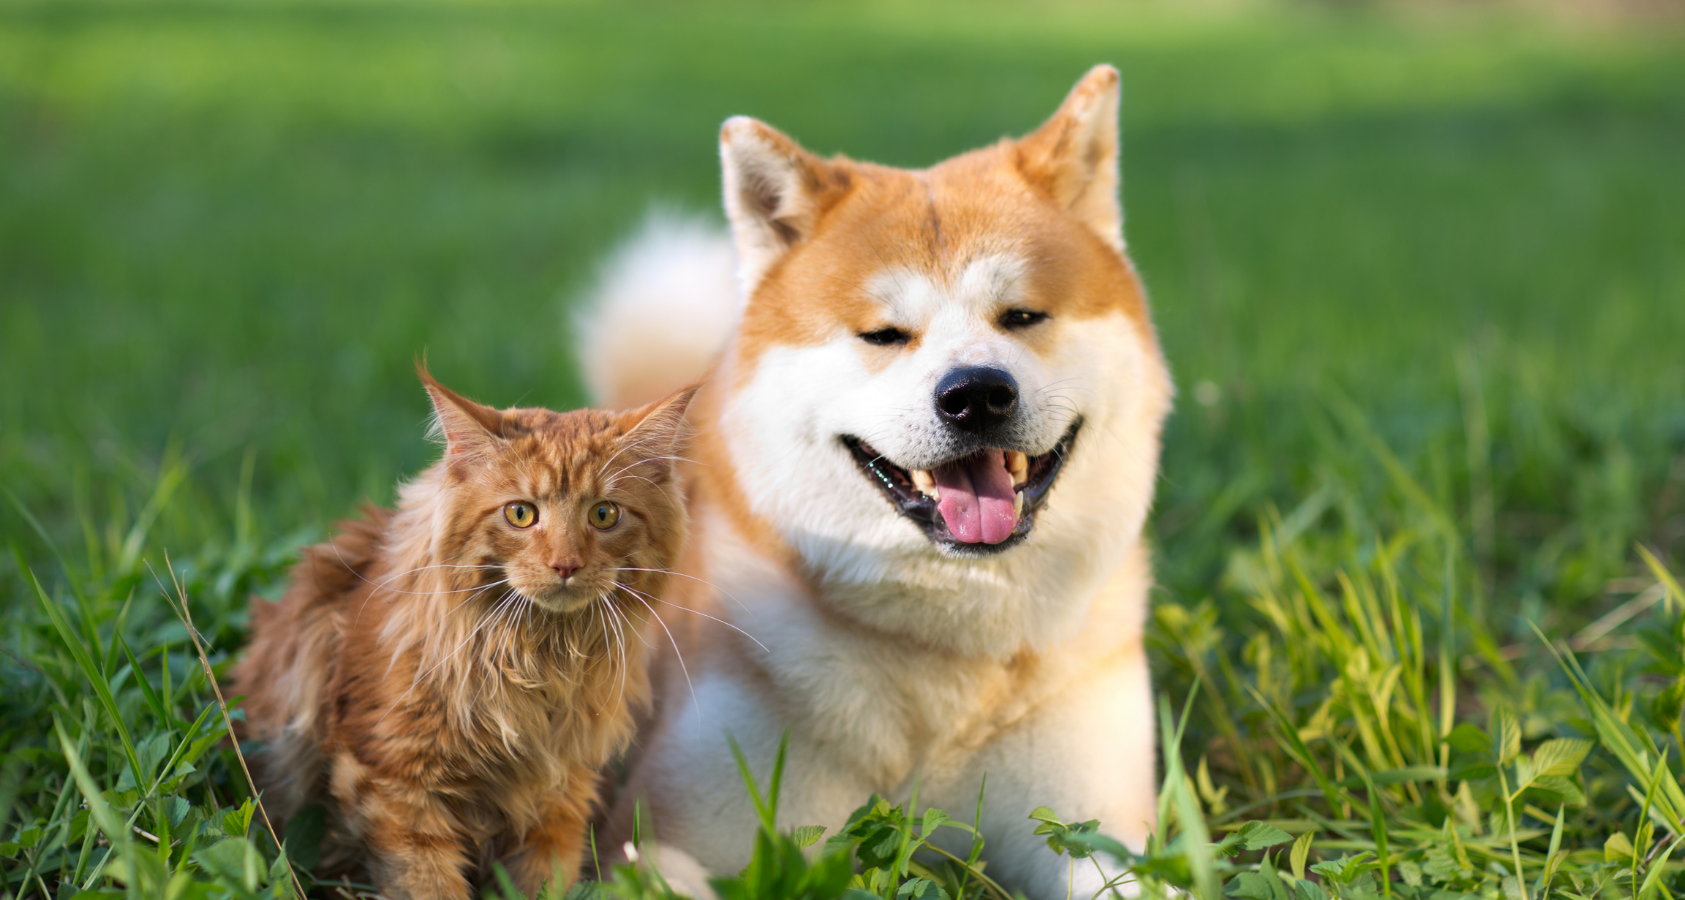 Can a Dog Penetrate a Cat? Cats and Dogs Mating